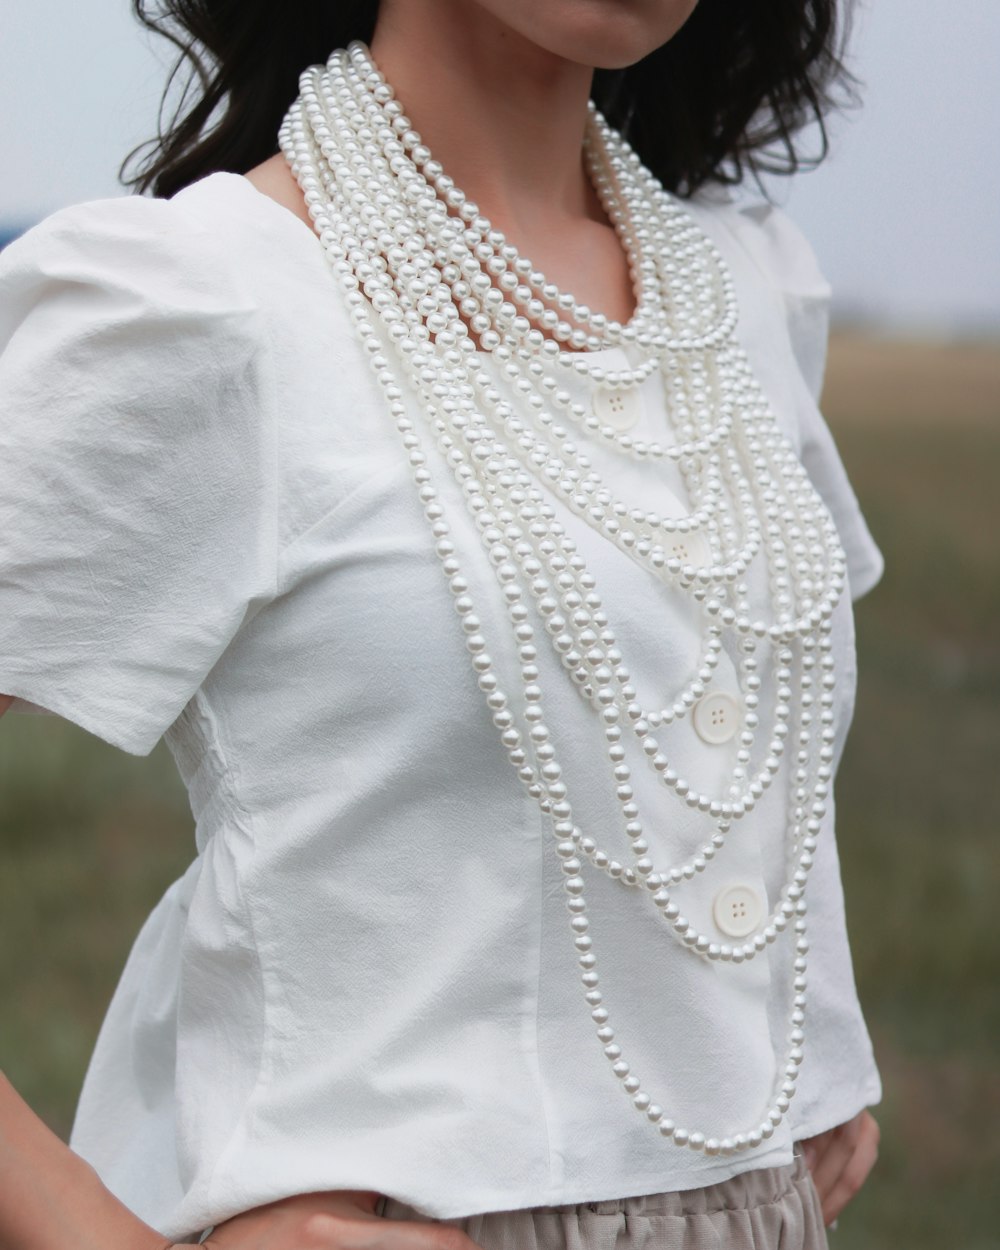 woman wearing white blouse and white pearl necklace